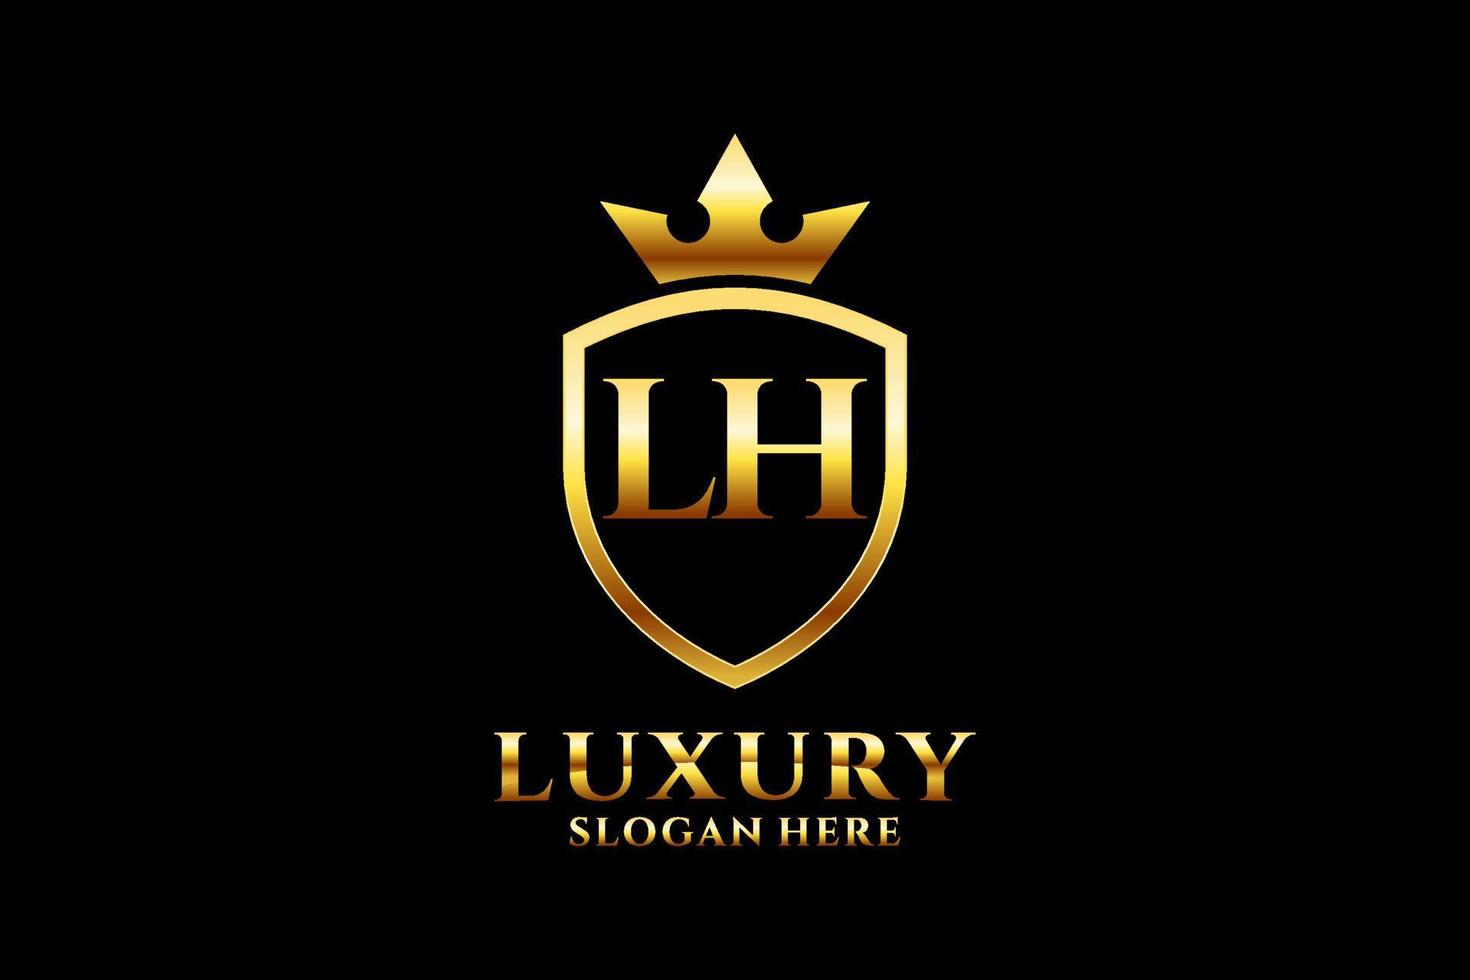 initial LH elegant luxury monogram logo or badge template with scrolls and royal crown - perfect for luxurious branding projects vector